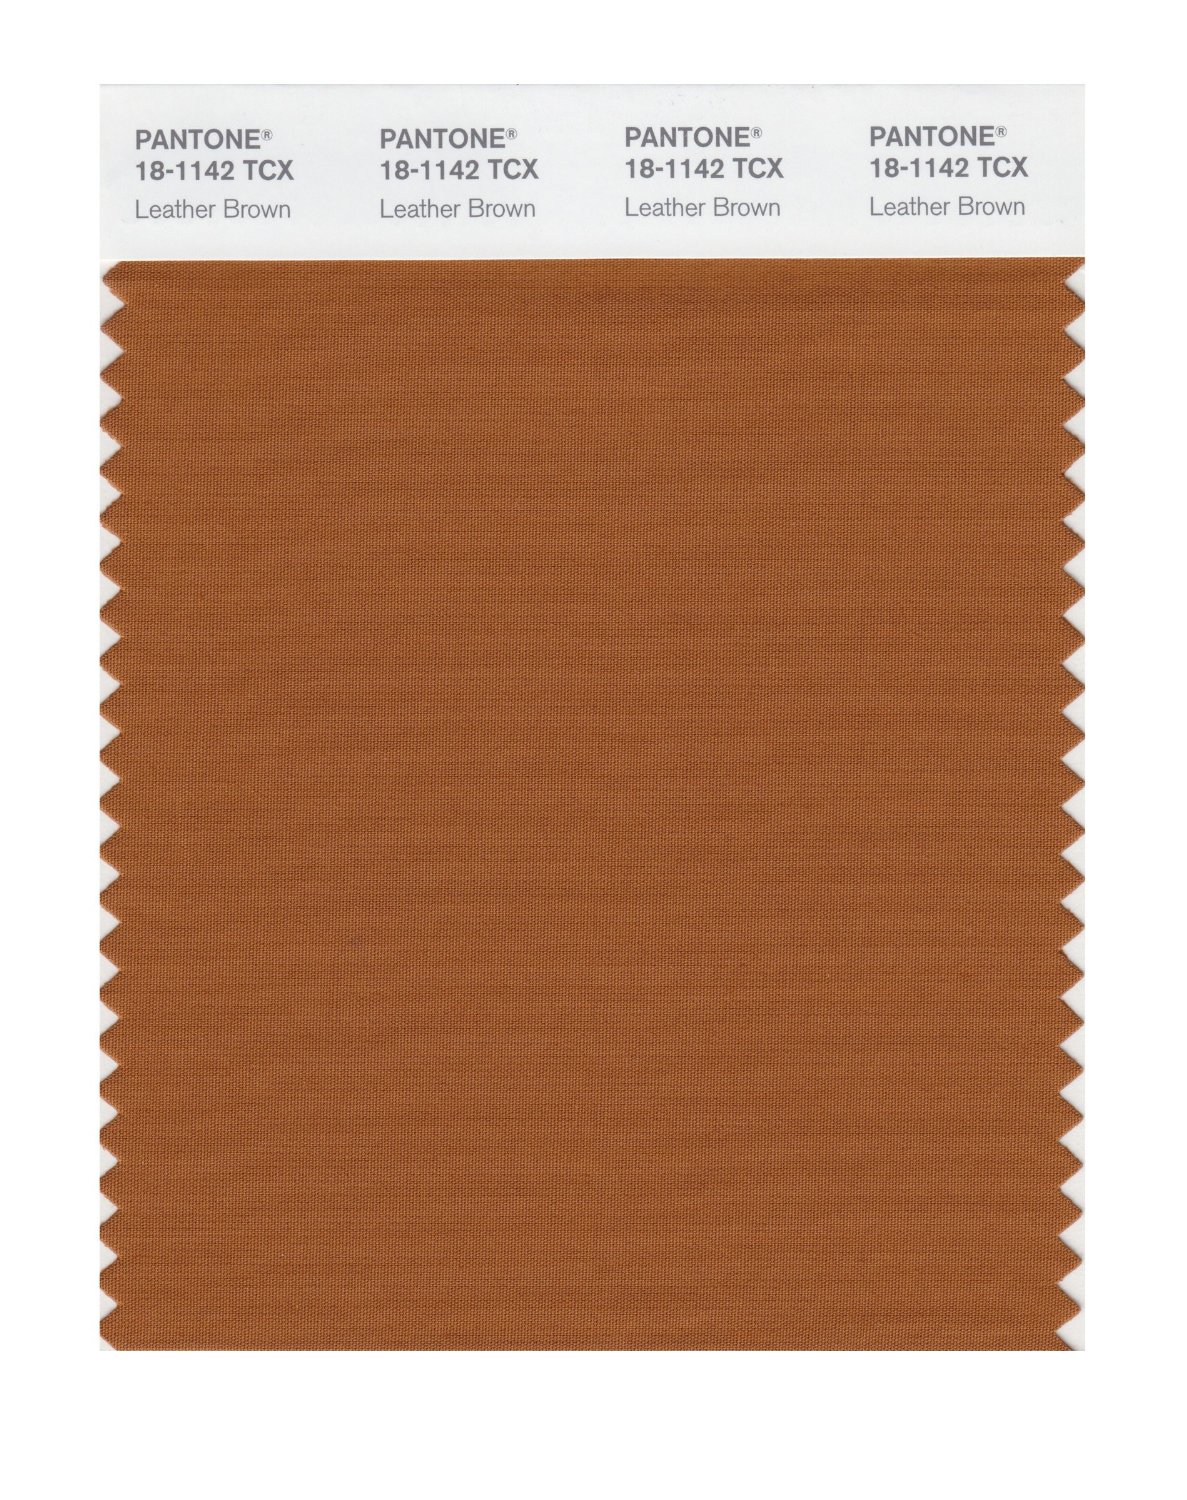 Pantone Cotton Swatch 18-1142 Leather Brown